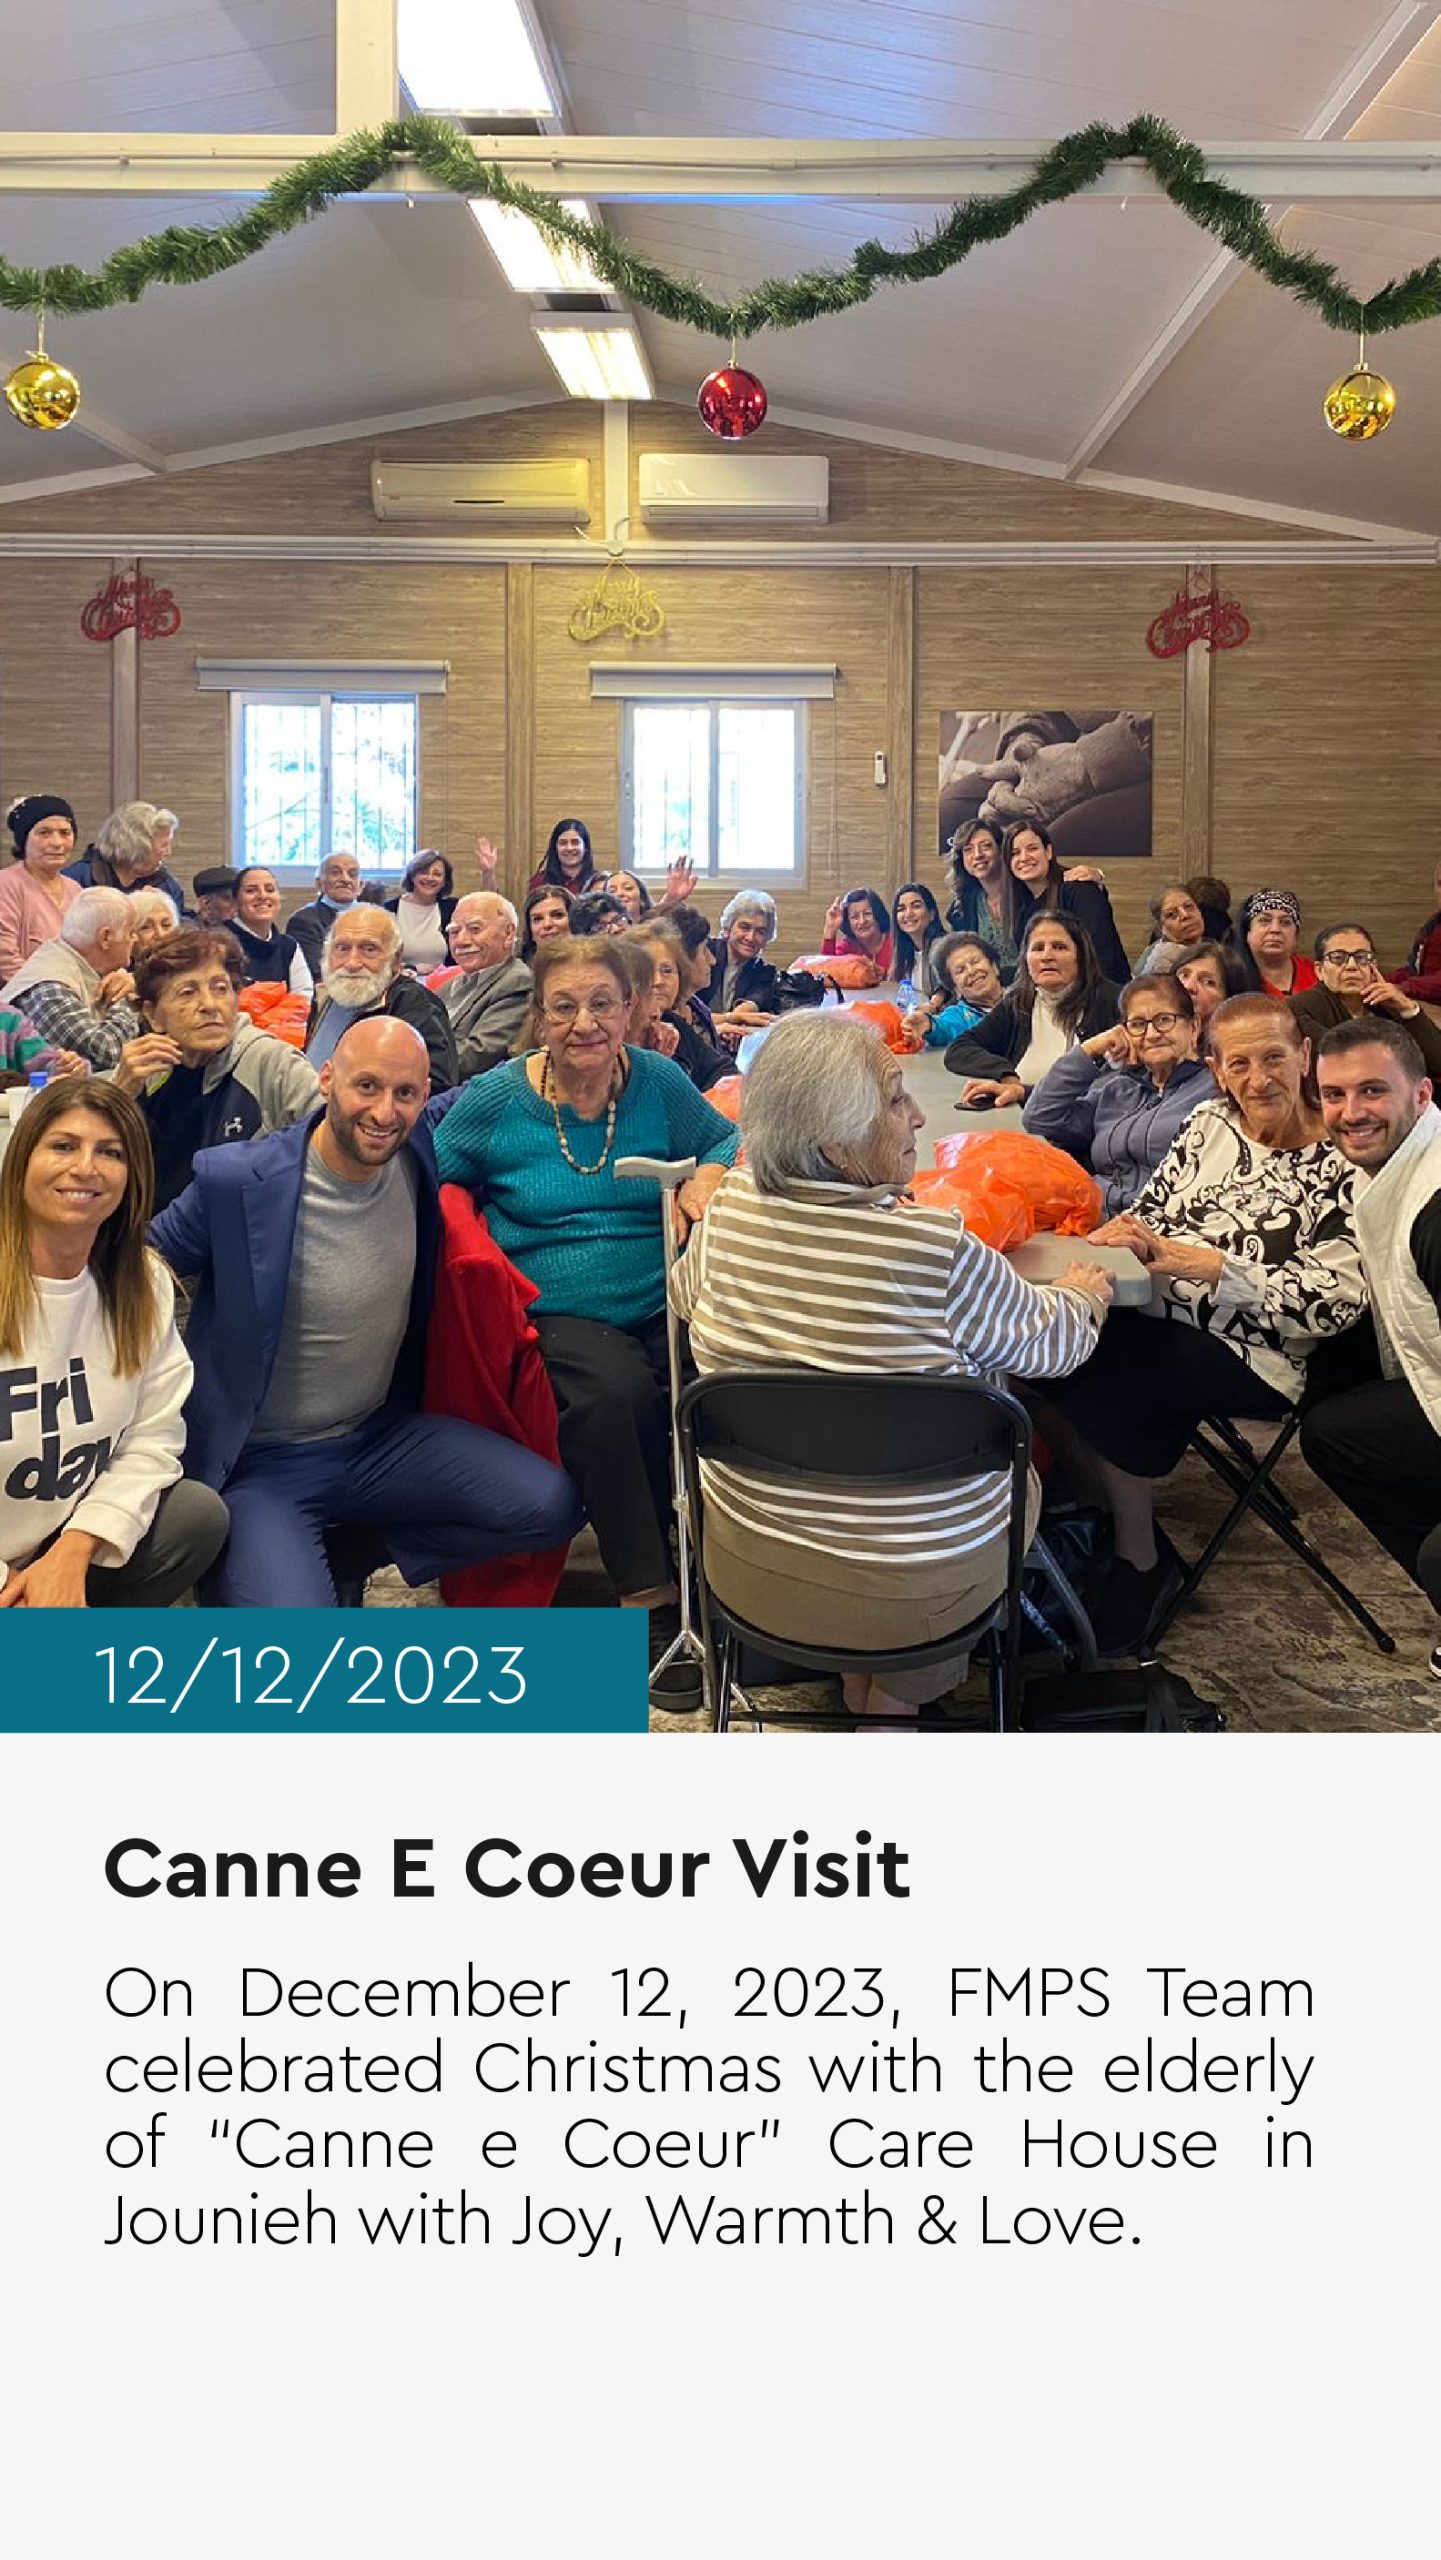 On December 12, 2023, FMPS Team celebrated Christmas with the elderly of “Canne e Coeur” Care House in Jounieh with Joy, Warmth & Love.